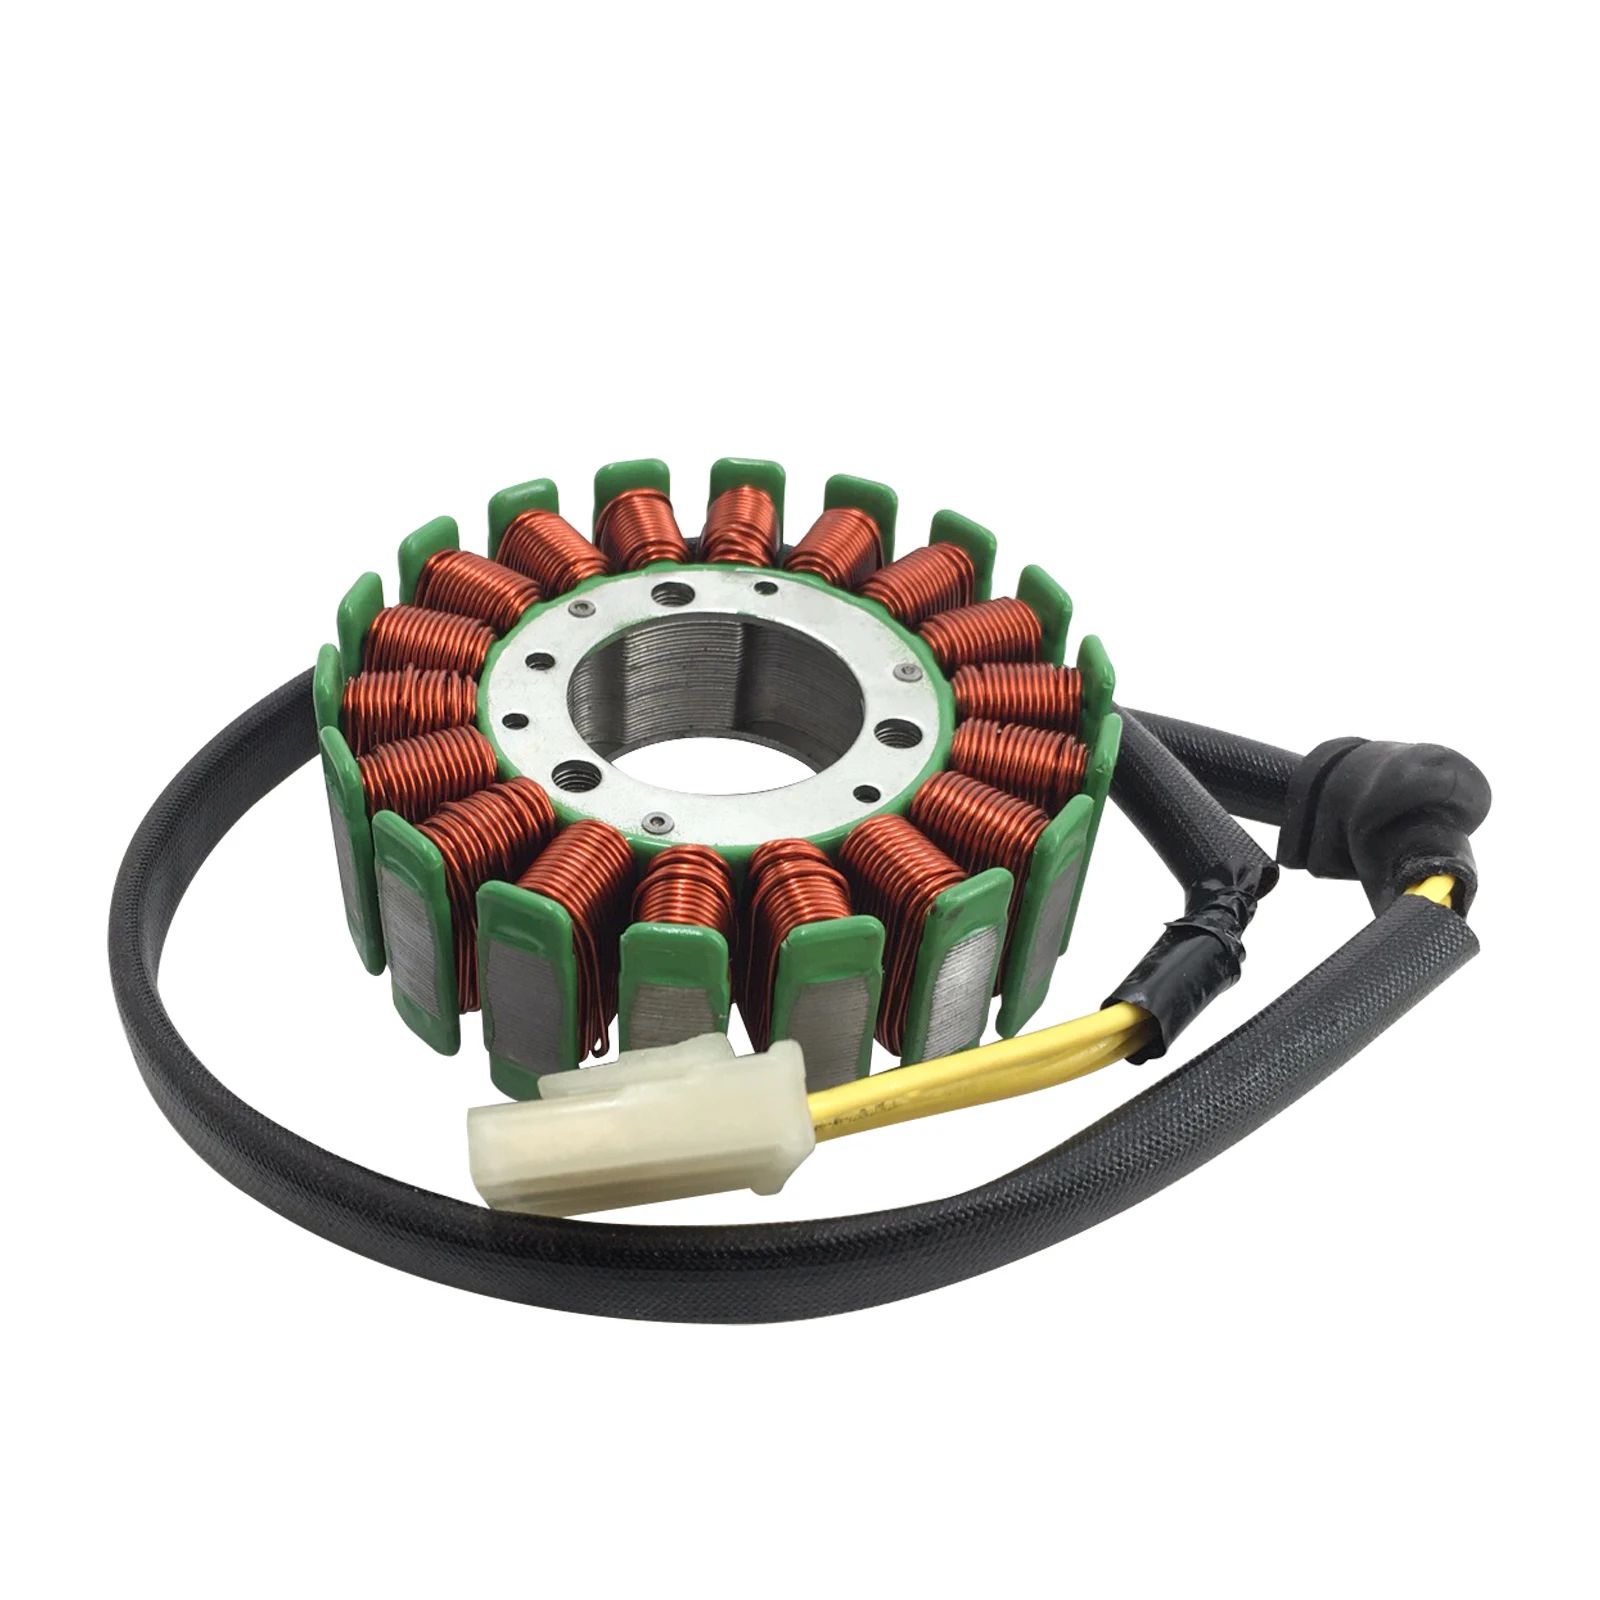 Generator Stator Coils Ignition Stator Coil Magneto For KTM 125 200 DUKE 125 200 RC125 RC200 /ABS 90139004000 Motorcycle Quad xfkm 5m roll a1 316 ni80 flat twisted wire fused clapton hive wires alien mix twisted quad tiger coils heating resistance coil